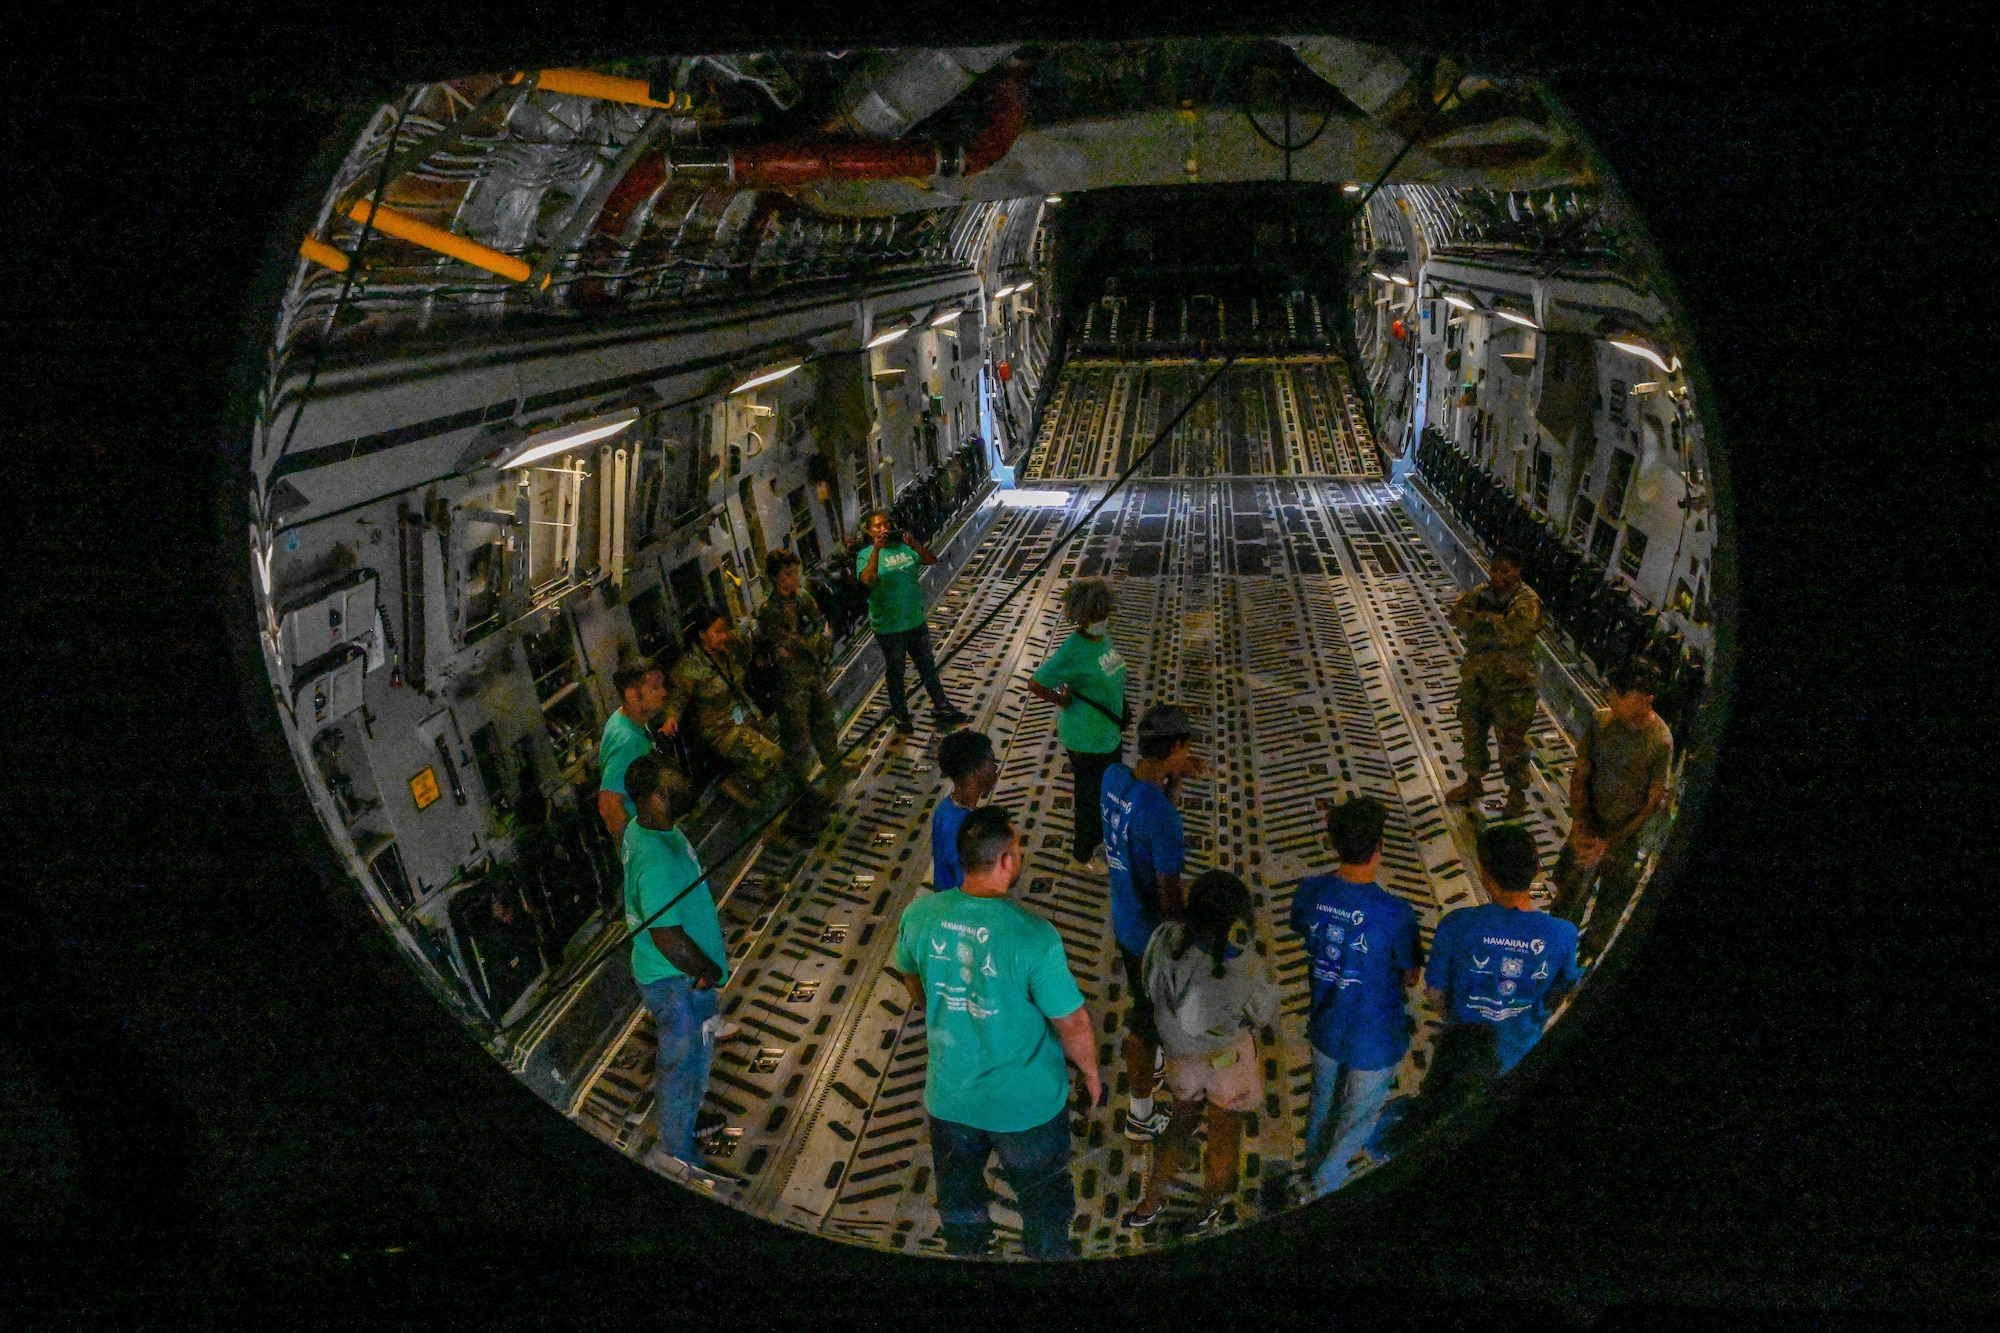 Members of the Organization of Black Aerospace Professionals tour a C-17 Globemaster III during a base tour at Joint Base Pearl Harbor-Hickam, Hawaii, July 28, 2022. The tour was a part of the Aerospace Career Education Academy, introducing children between the ages of 13-18 to opportunities that exist in the aviation industry. (U.S. Air Force photo by Senior Airman Makensie Cooper)